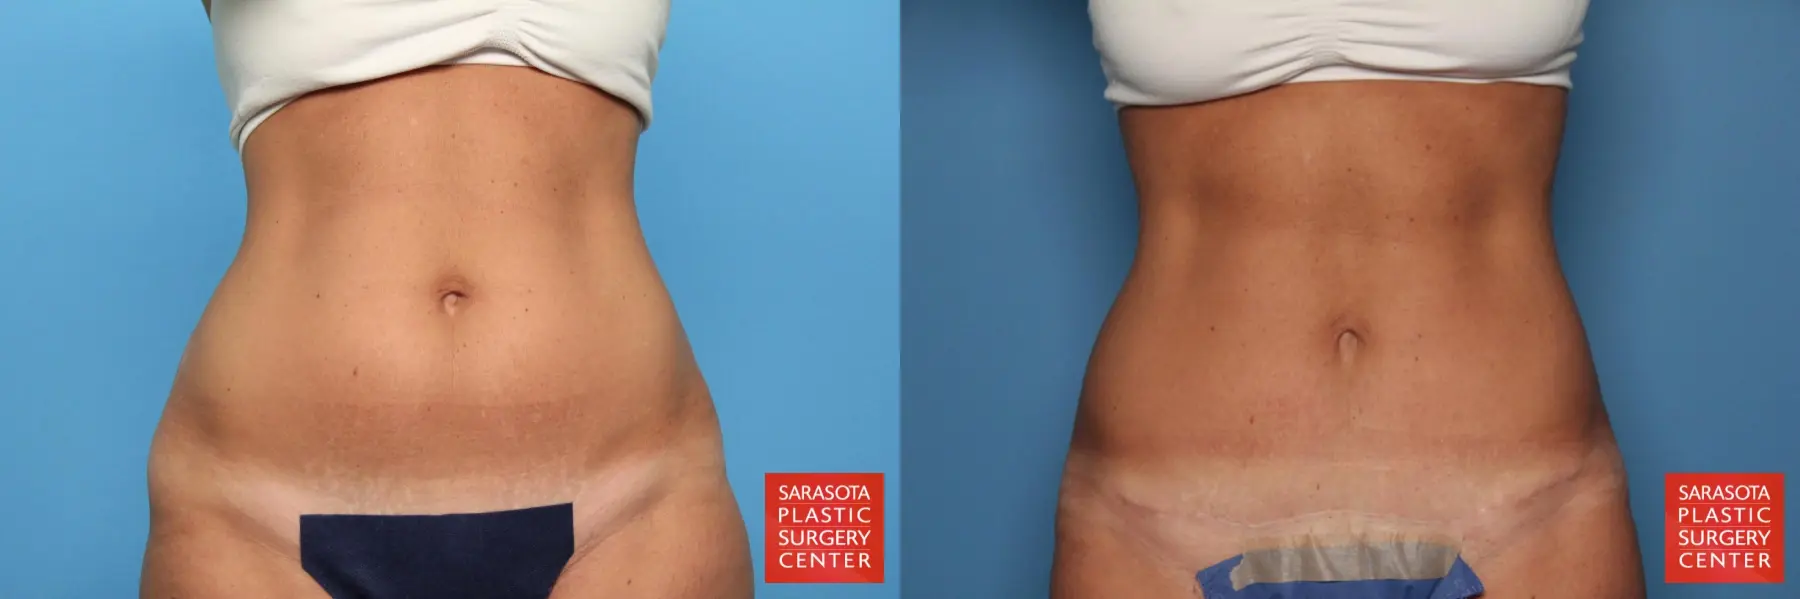 Lower Tummy Tuck : Patient 2 - Before and After  